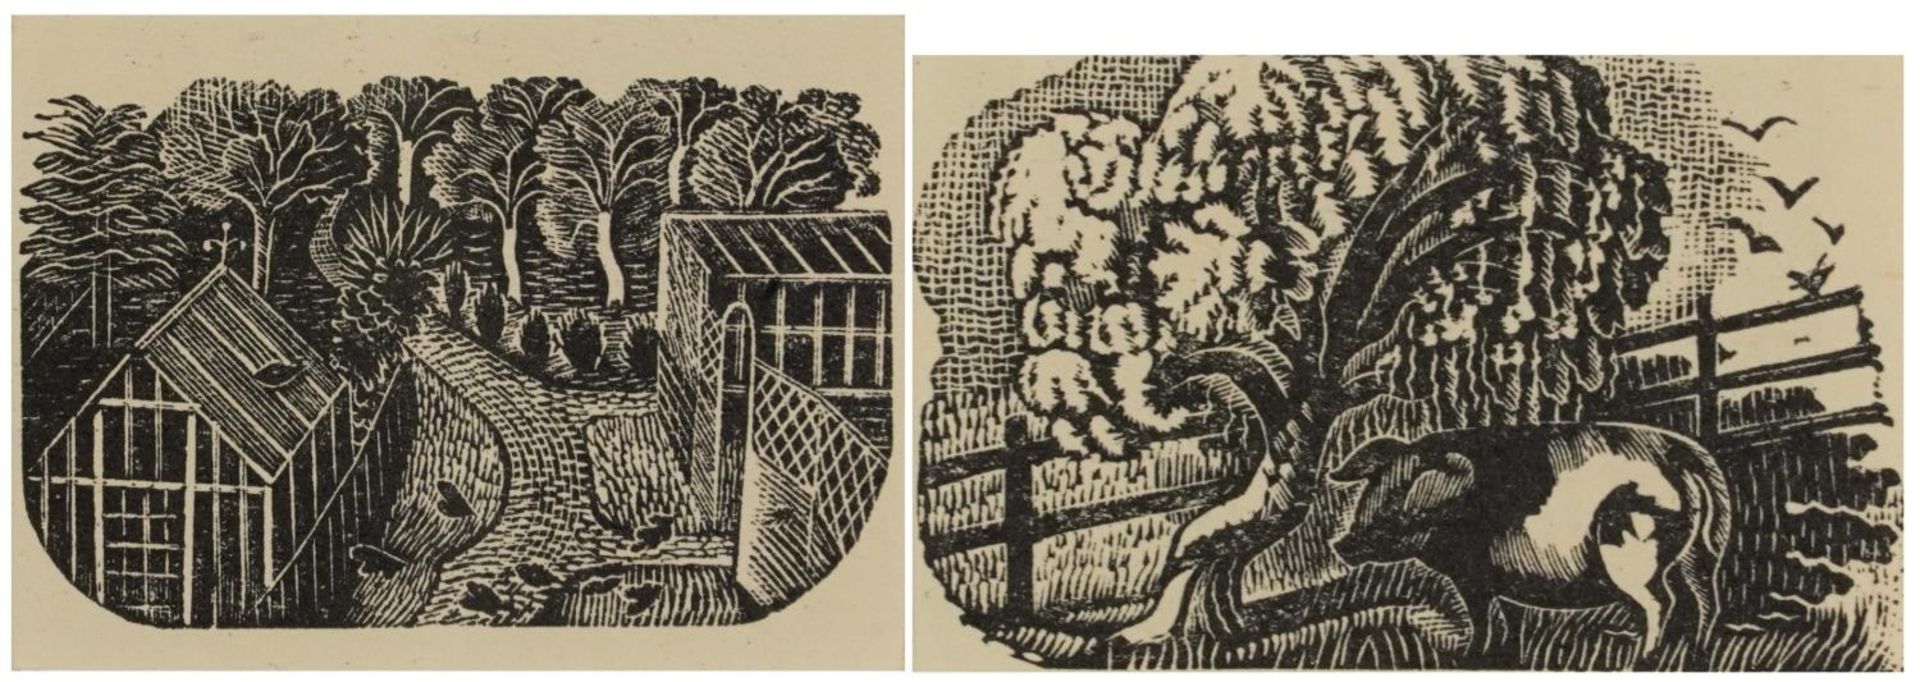 Eric Ravilious - Farming Scenes, two wood engravings, each inscribed Kynoch Press notebook